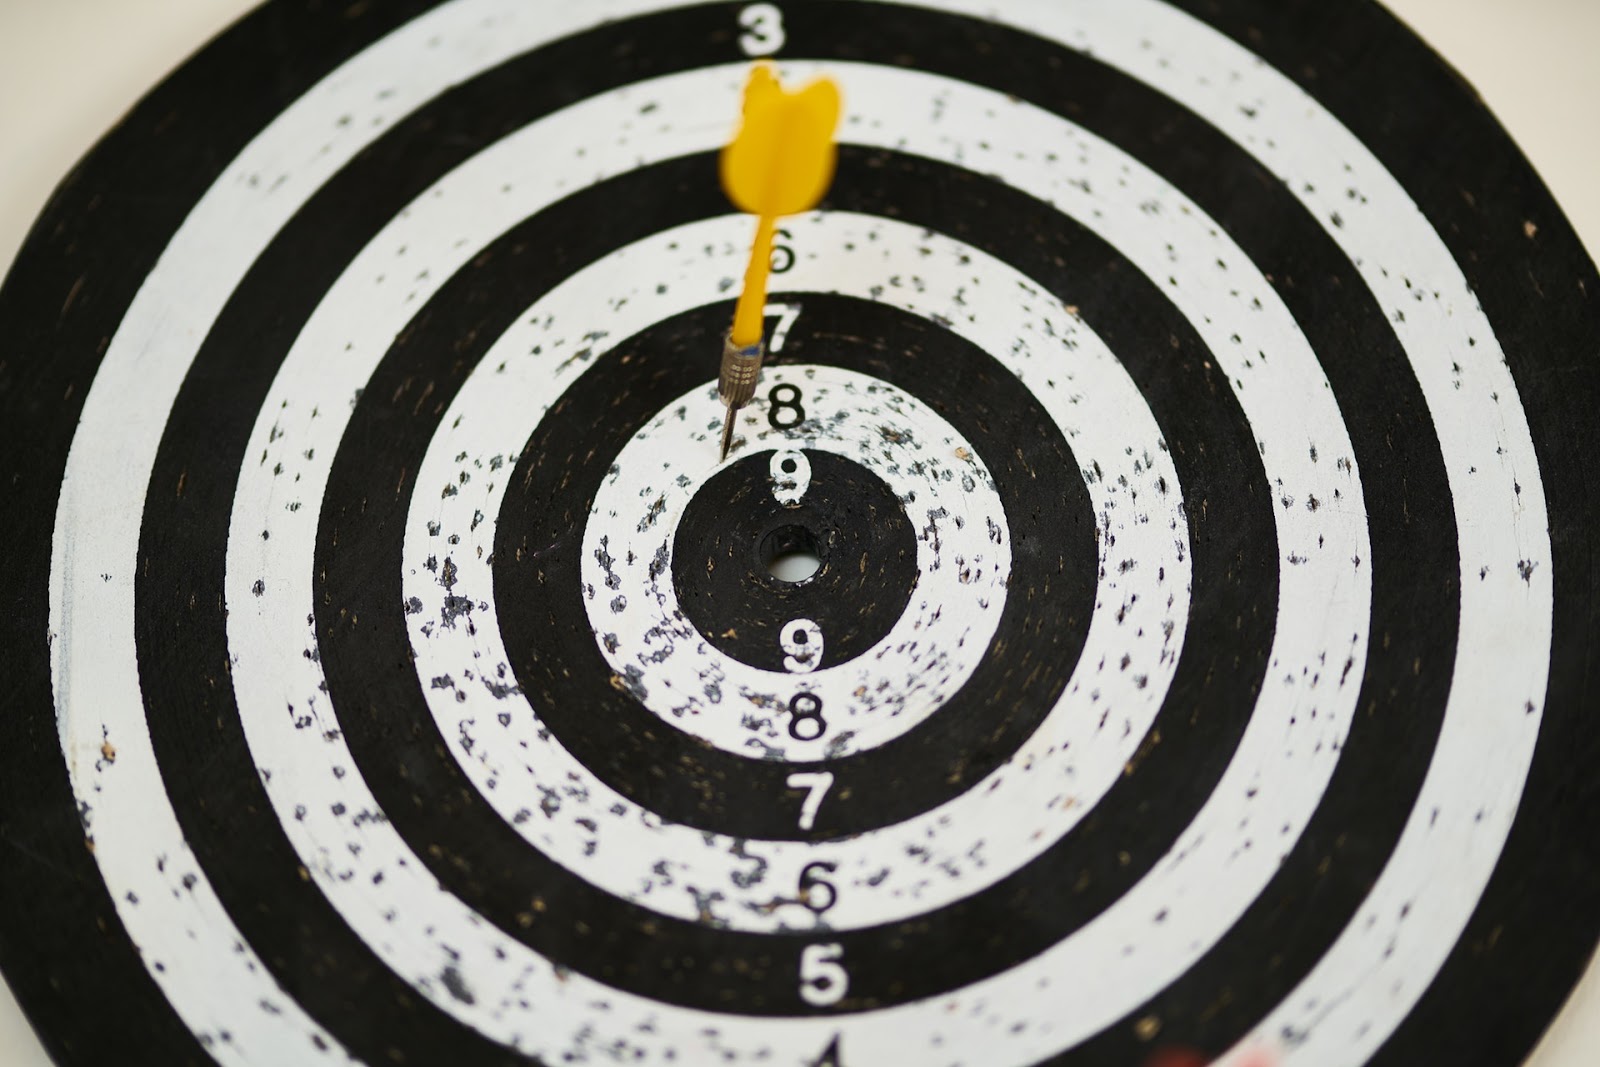 A target with a dart in it. Goals and targets play a big role in figuring out how to learn a language.